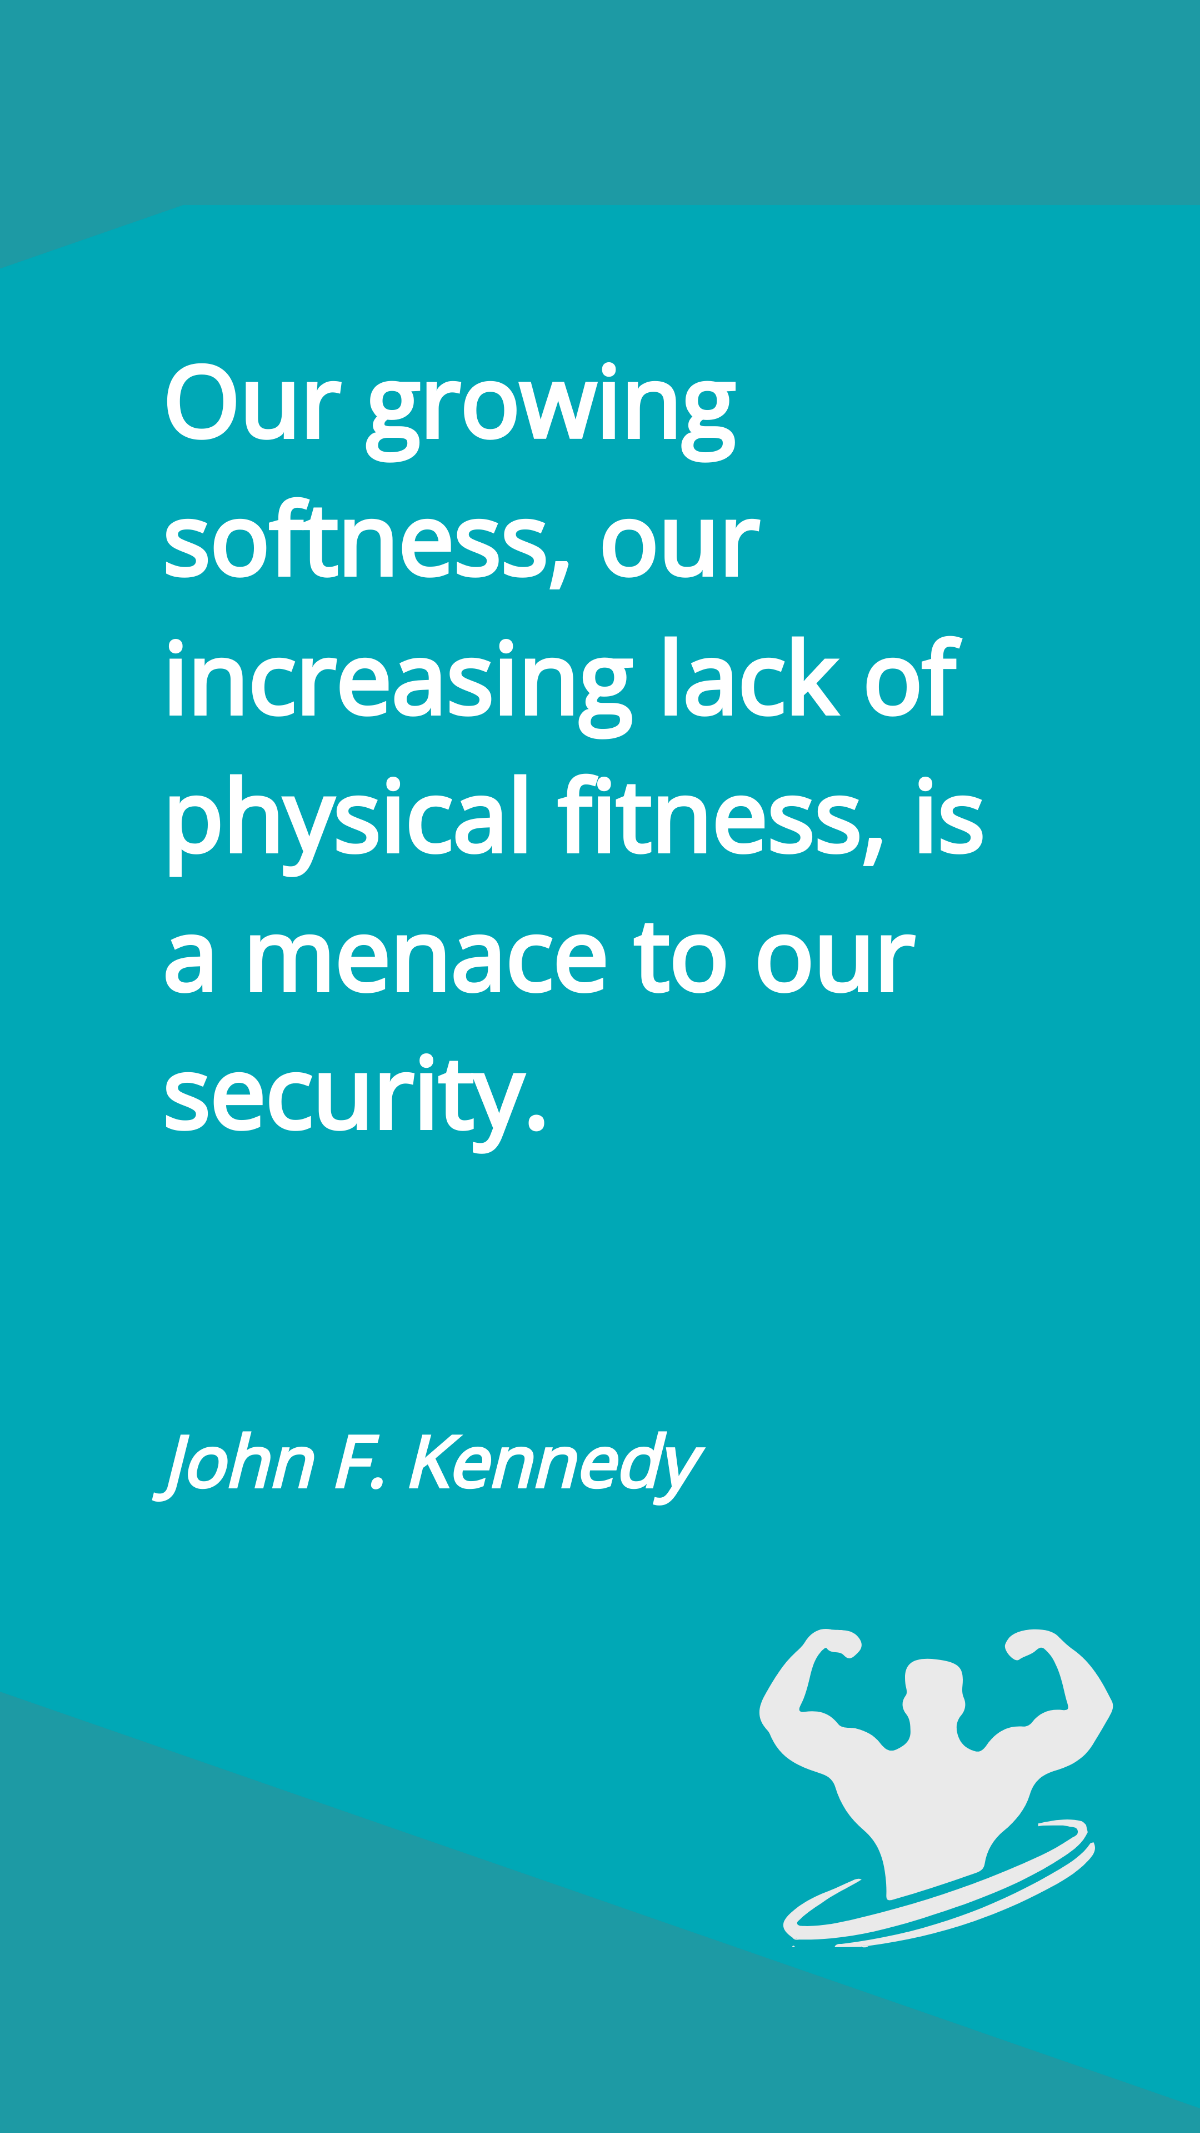 John F. Kennedy - Our growing softness, our increasing lack of physical fitness, is a menace to our security. Template